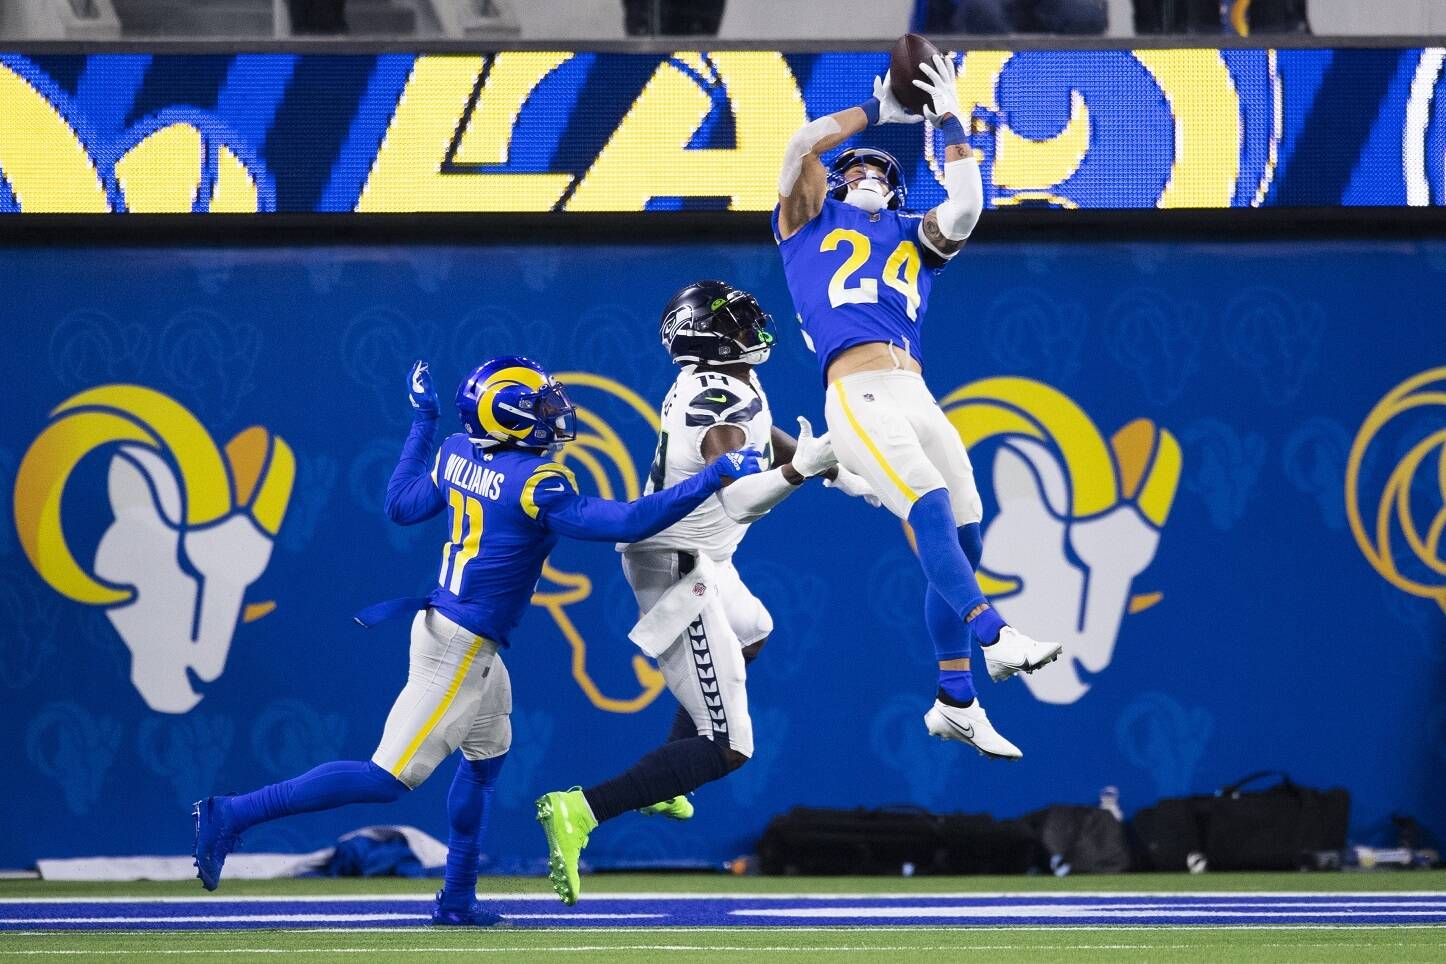 Los Angeles Rams free safety Taylor Rapp (24), a former Washington Husky, intercepts a pass intended to Seattle Seahawks wide receiver DK Metcalf (14) during an NFL football game Tuesday  in Inglewood, Calif. (Kyusung Gong/The Associated Press)